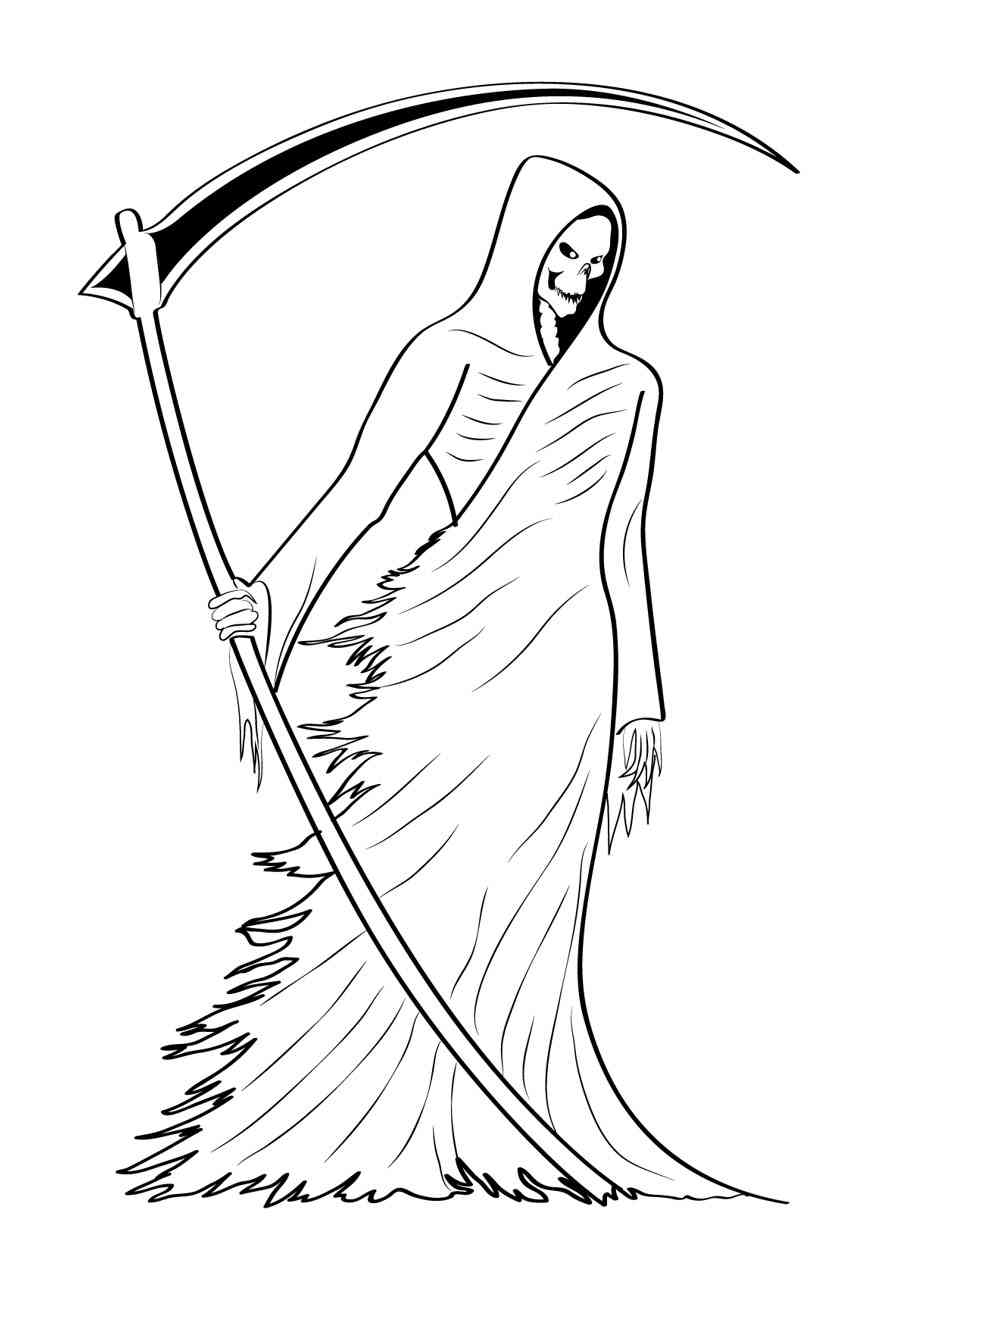 Grim Reaper coloring pages